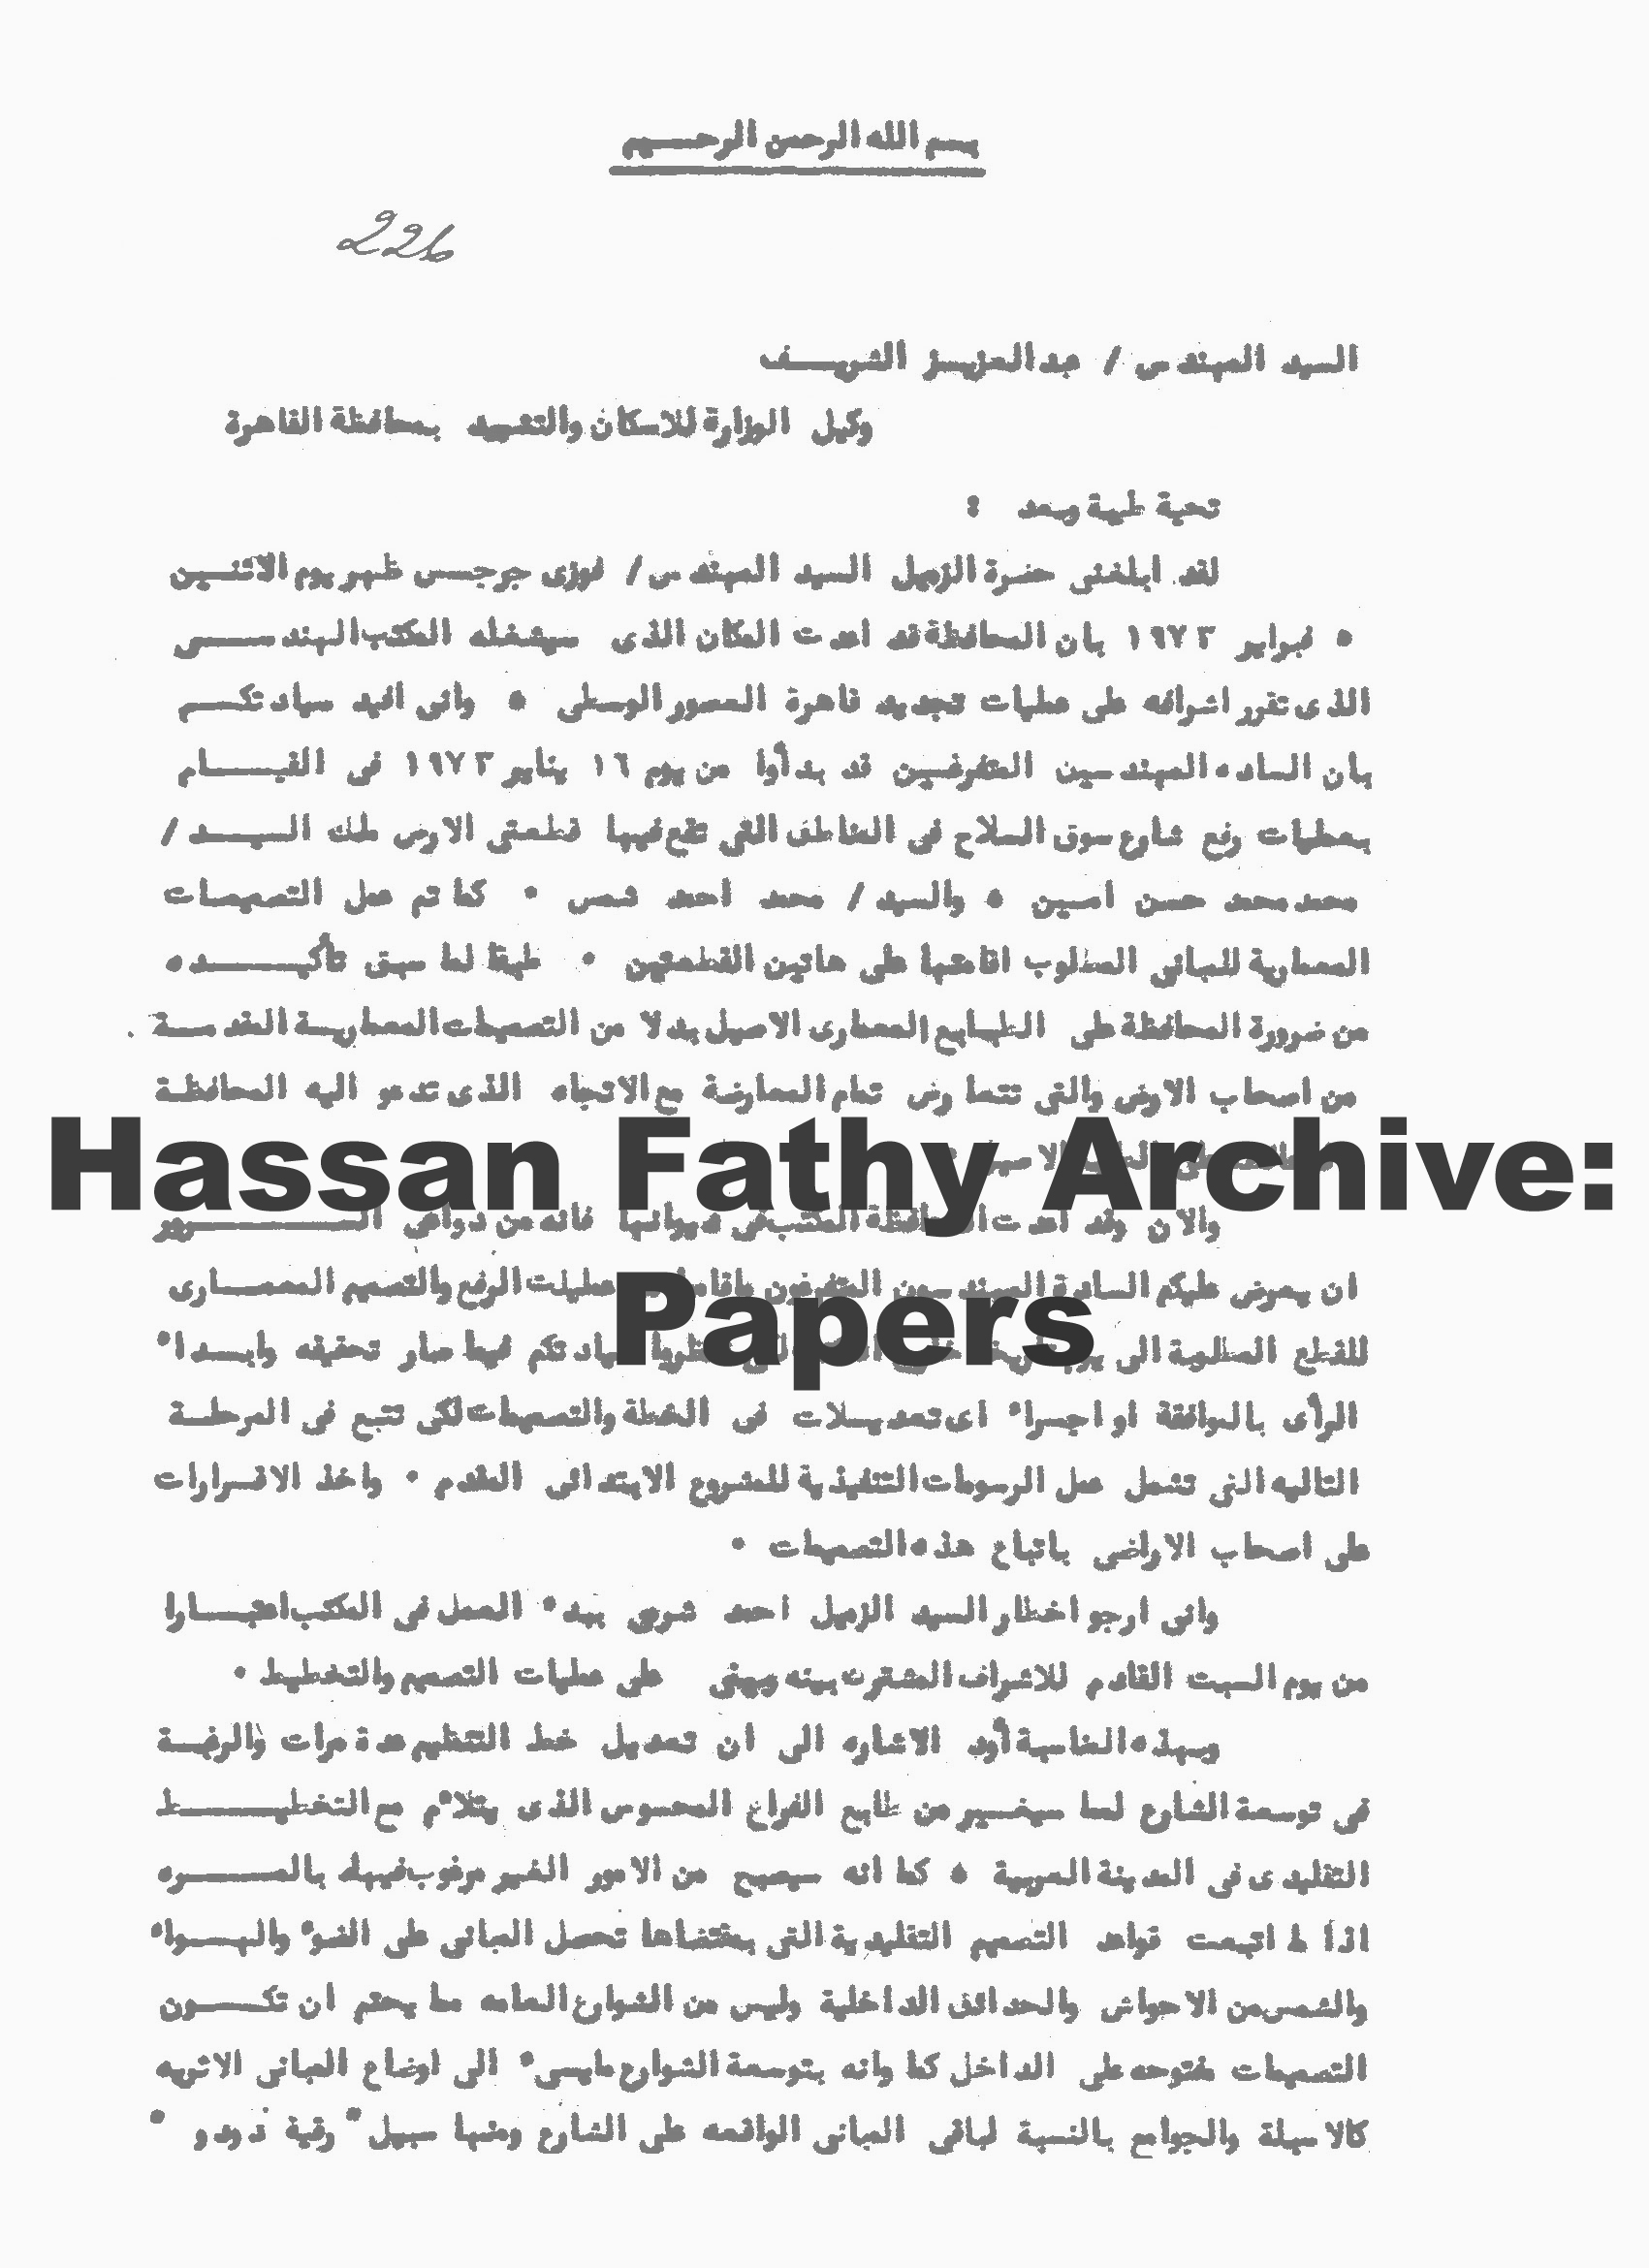 Hassan Fathy Archive: Papers